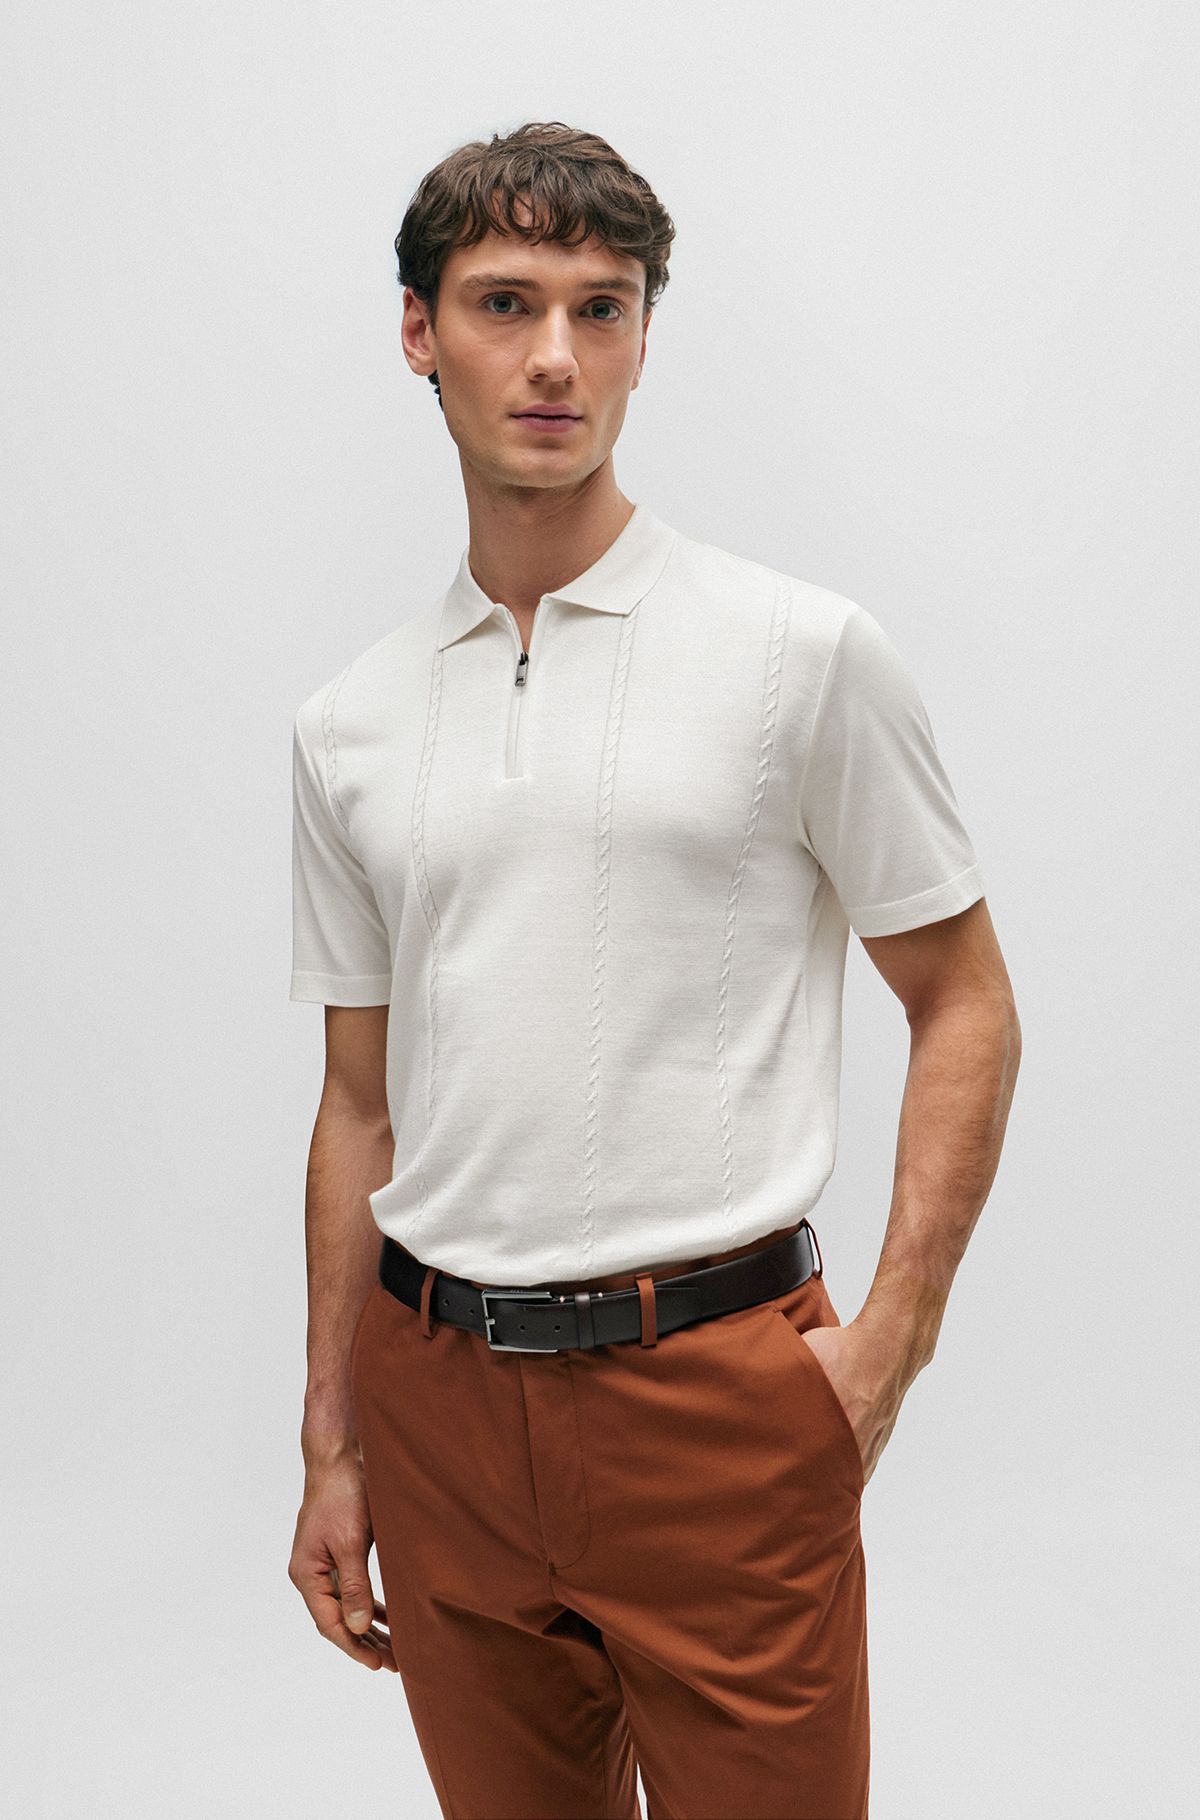 Zip-neck polo shirt in cotton and silk, White